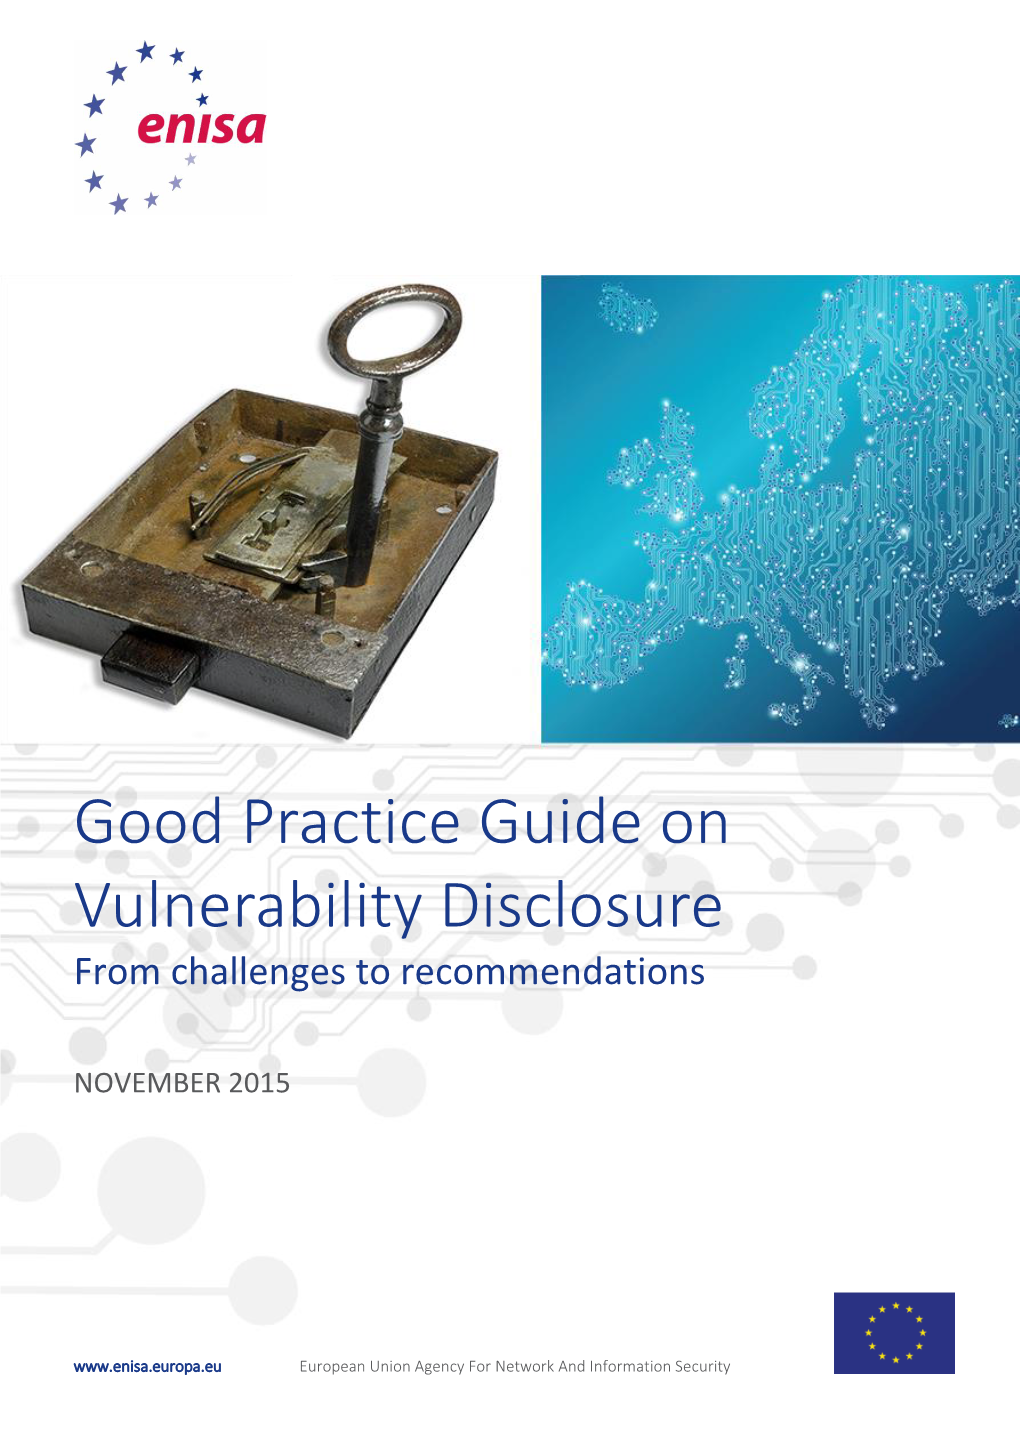 Good Practice Guide on Vulnerability Disclosure from Challenges to Recommendations